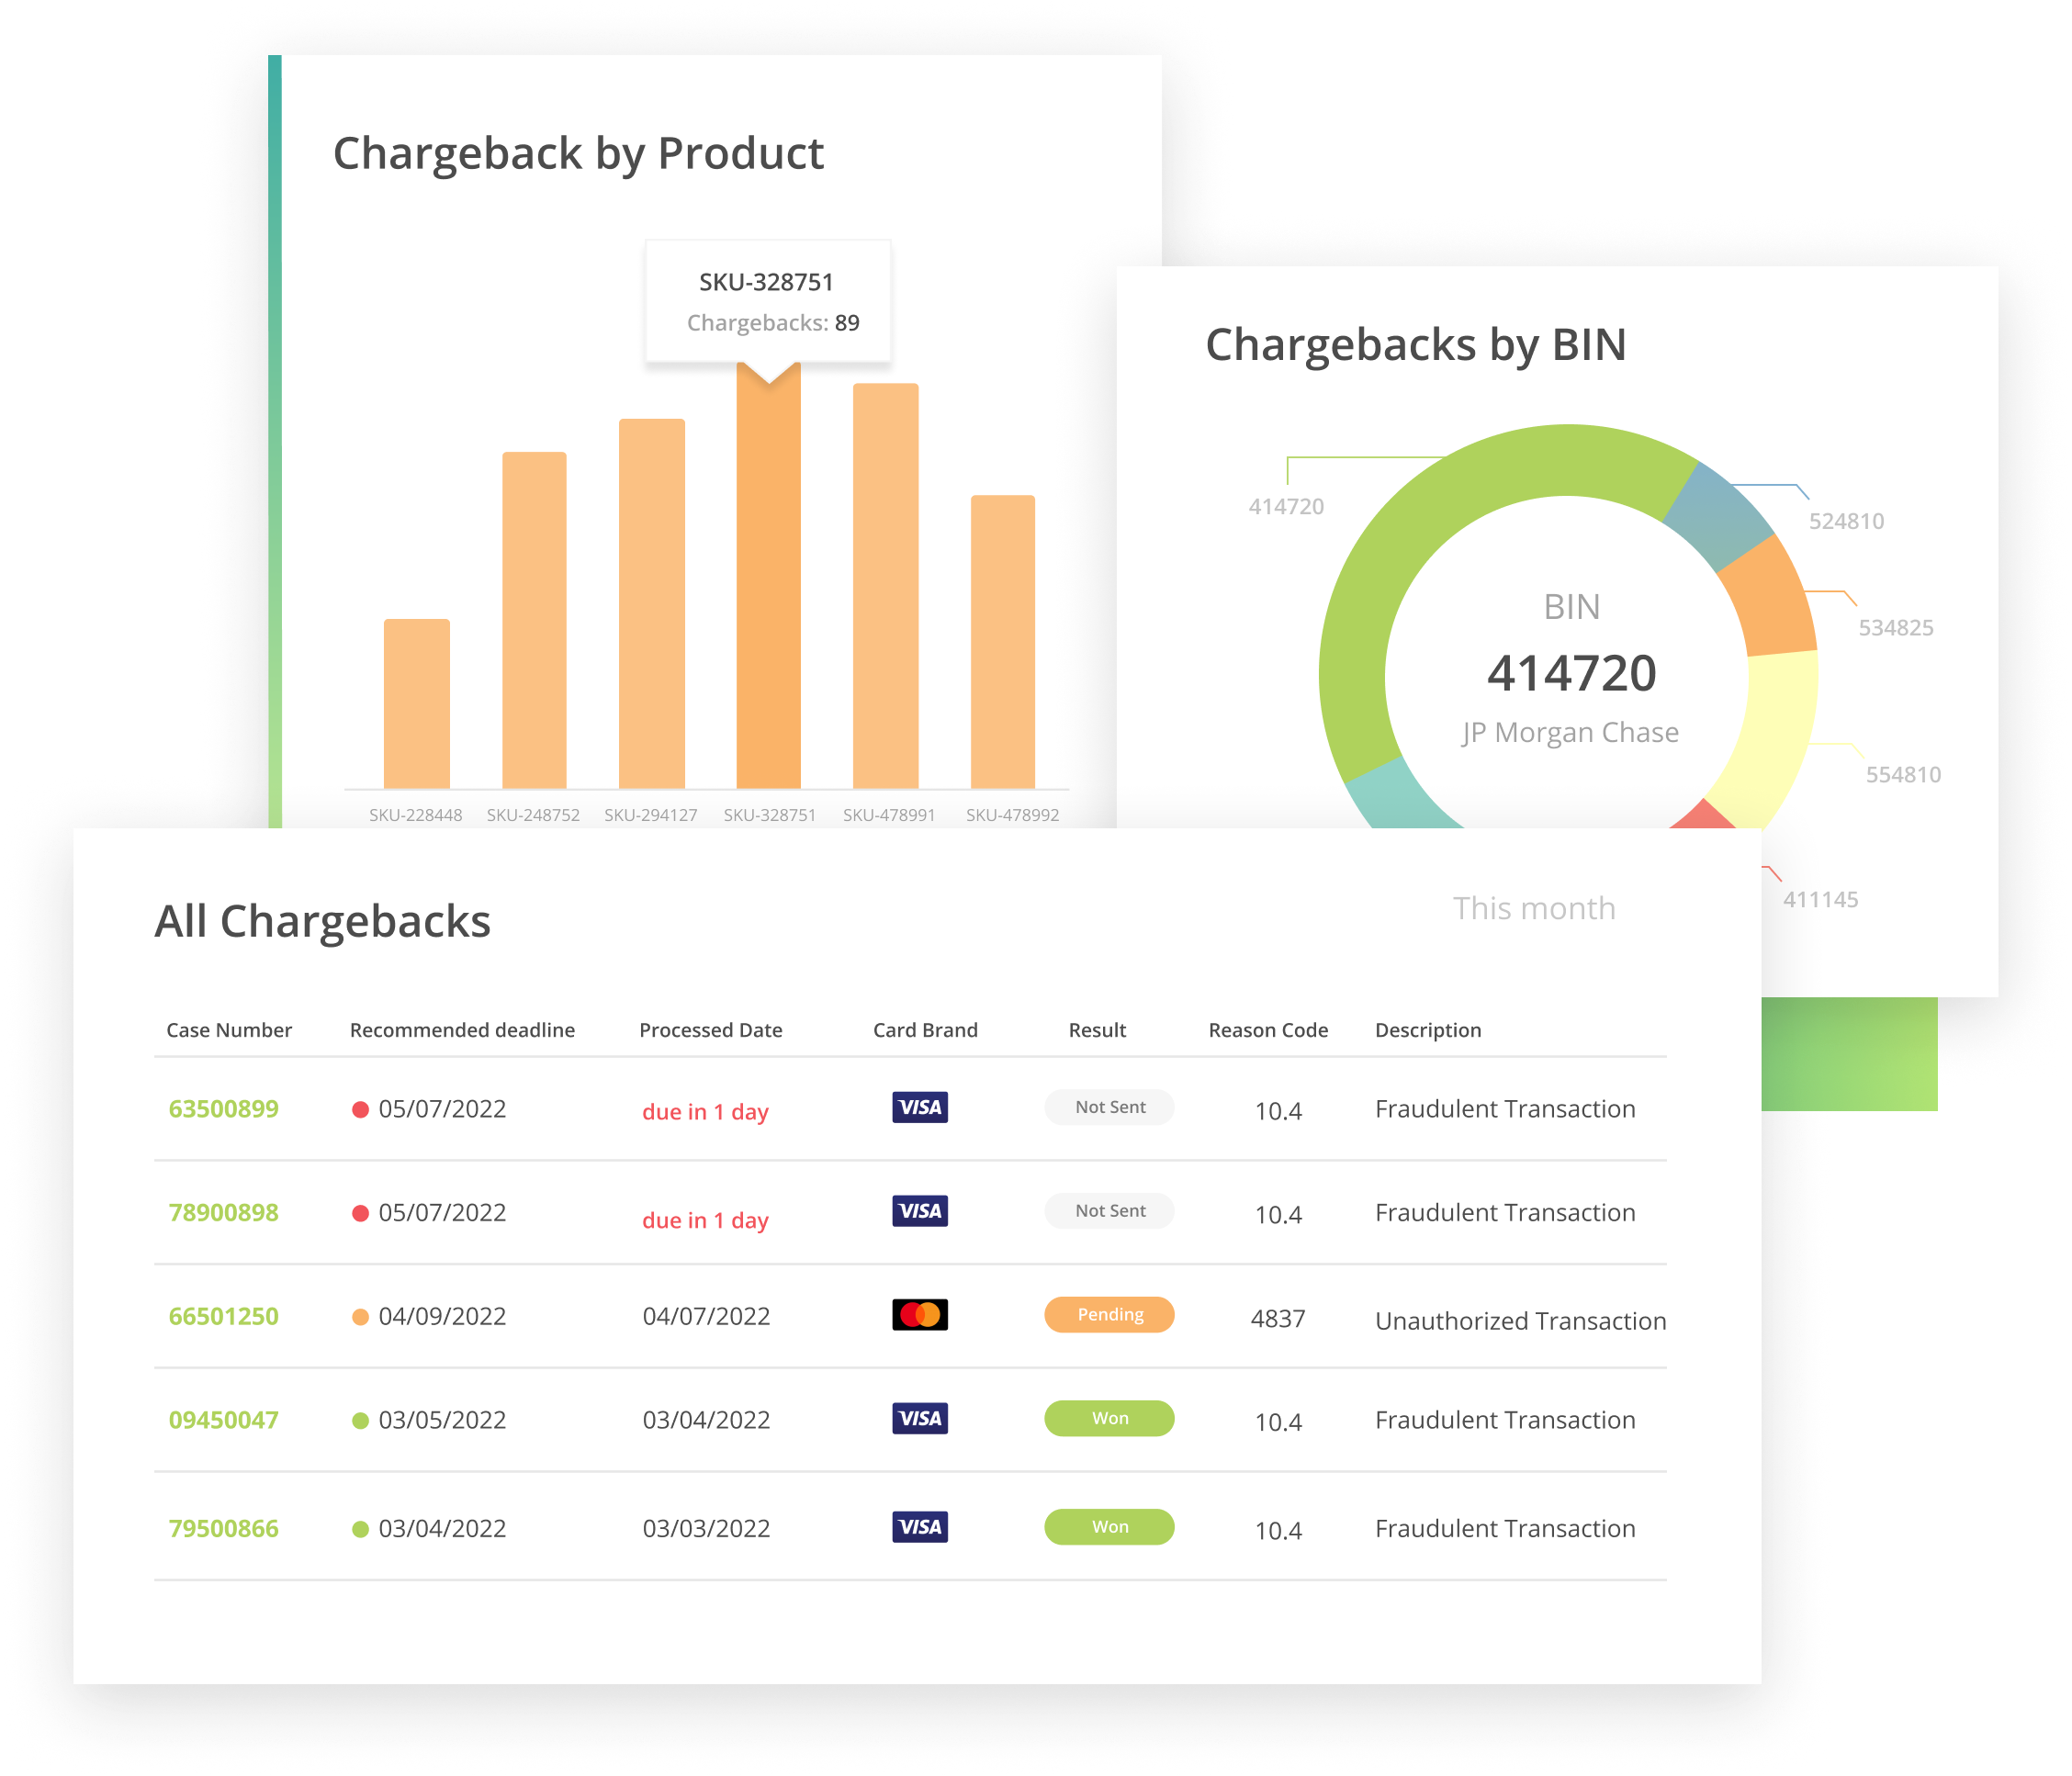 Data analysis brings your chargeback management strategy full circle. Figure out what is and isn't working so your results are always improving. With informed decisions, you can increase ROI as much as 900%.